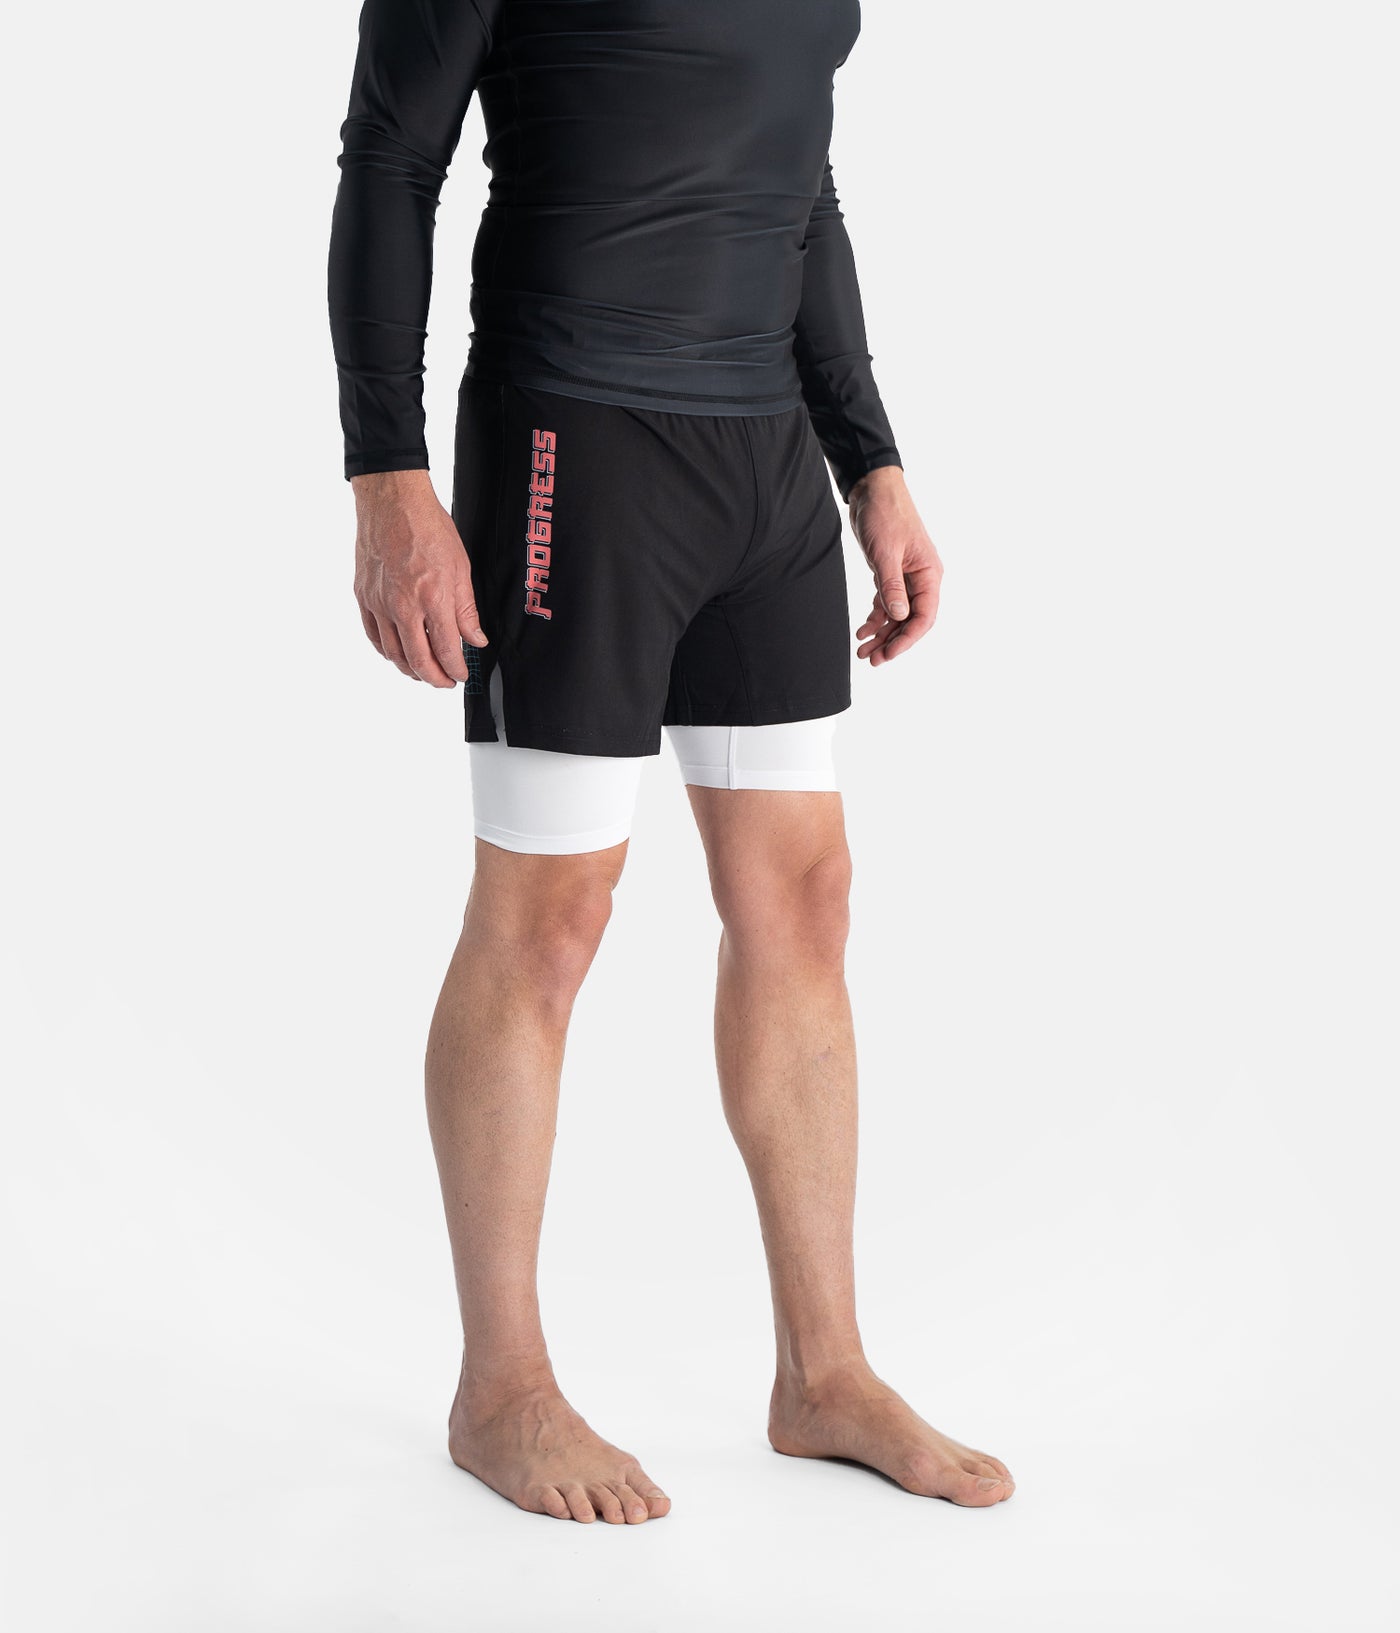 Why you will love the Unknown Great Wave Hybrid Shorts!